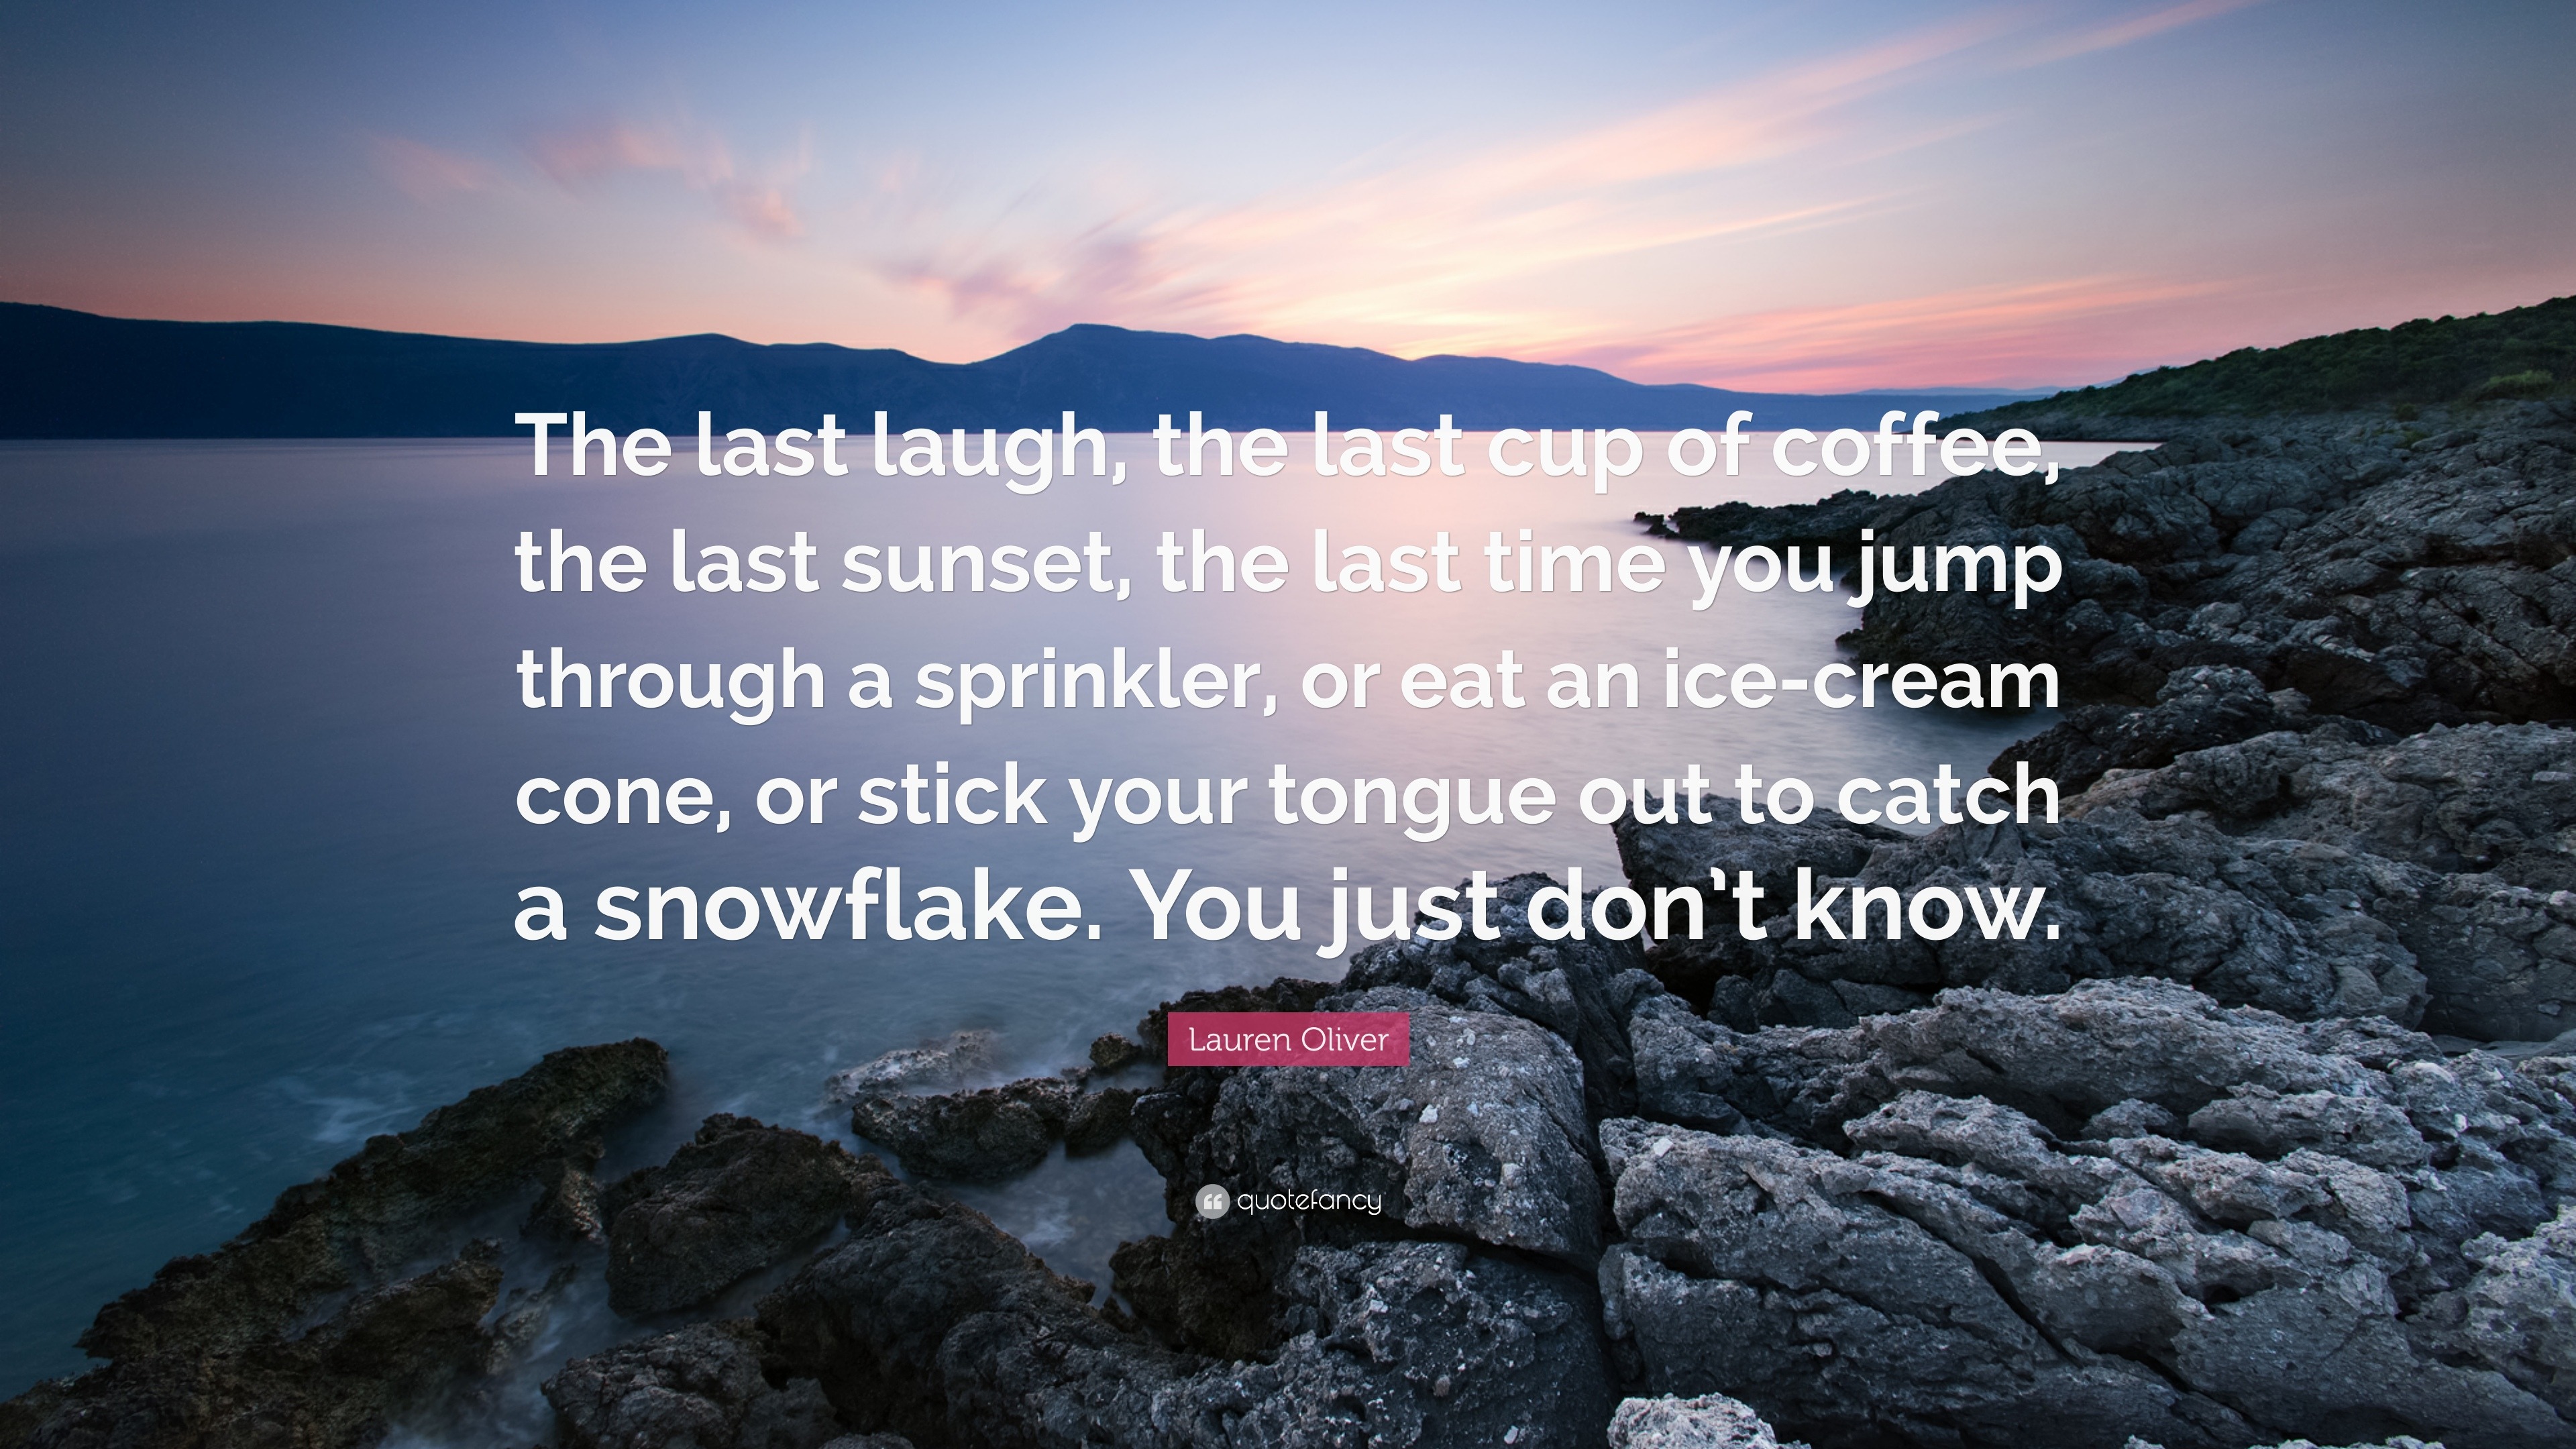 Lauren Oliver Quote The Last Laugh The Last Cup Of Coffee The Last Sunset The Last Time You Jump Through A Sprinkler Or Eat An Ice Cream 6 Wallpapers Quotefancy